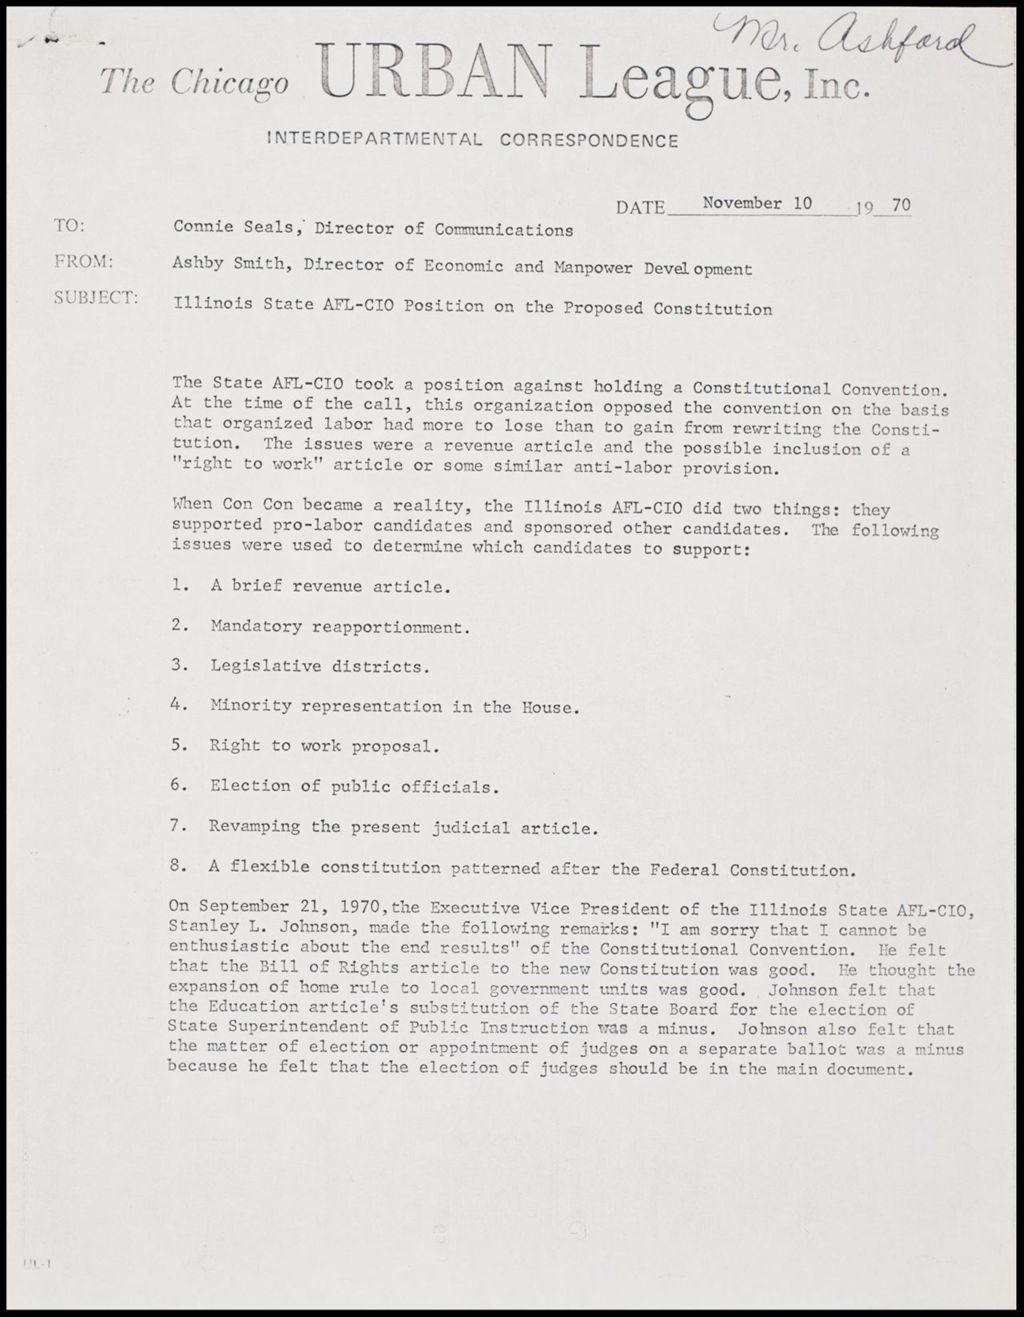 Miniature of AFL-CIO position on the proposed State Constitution, 1970  (Folder I-3014)